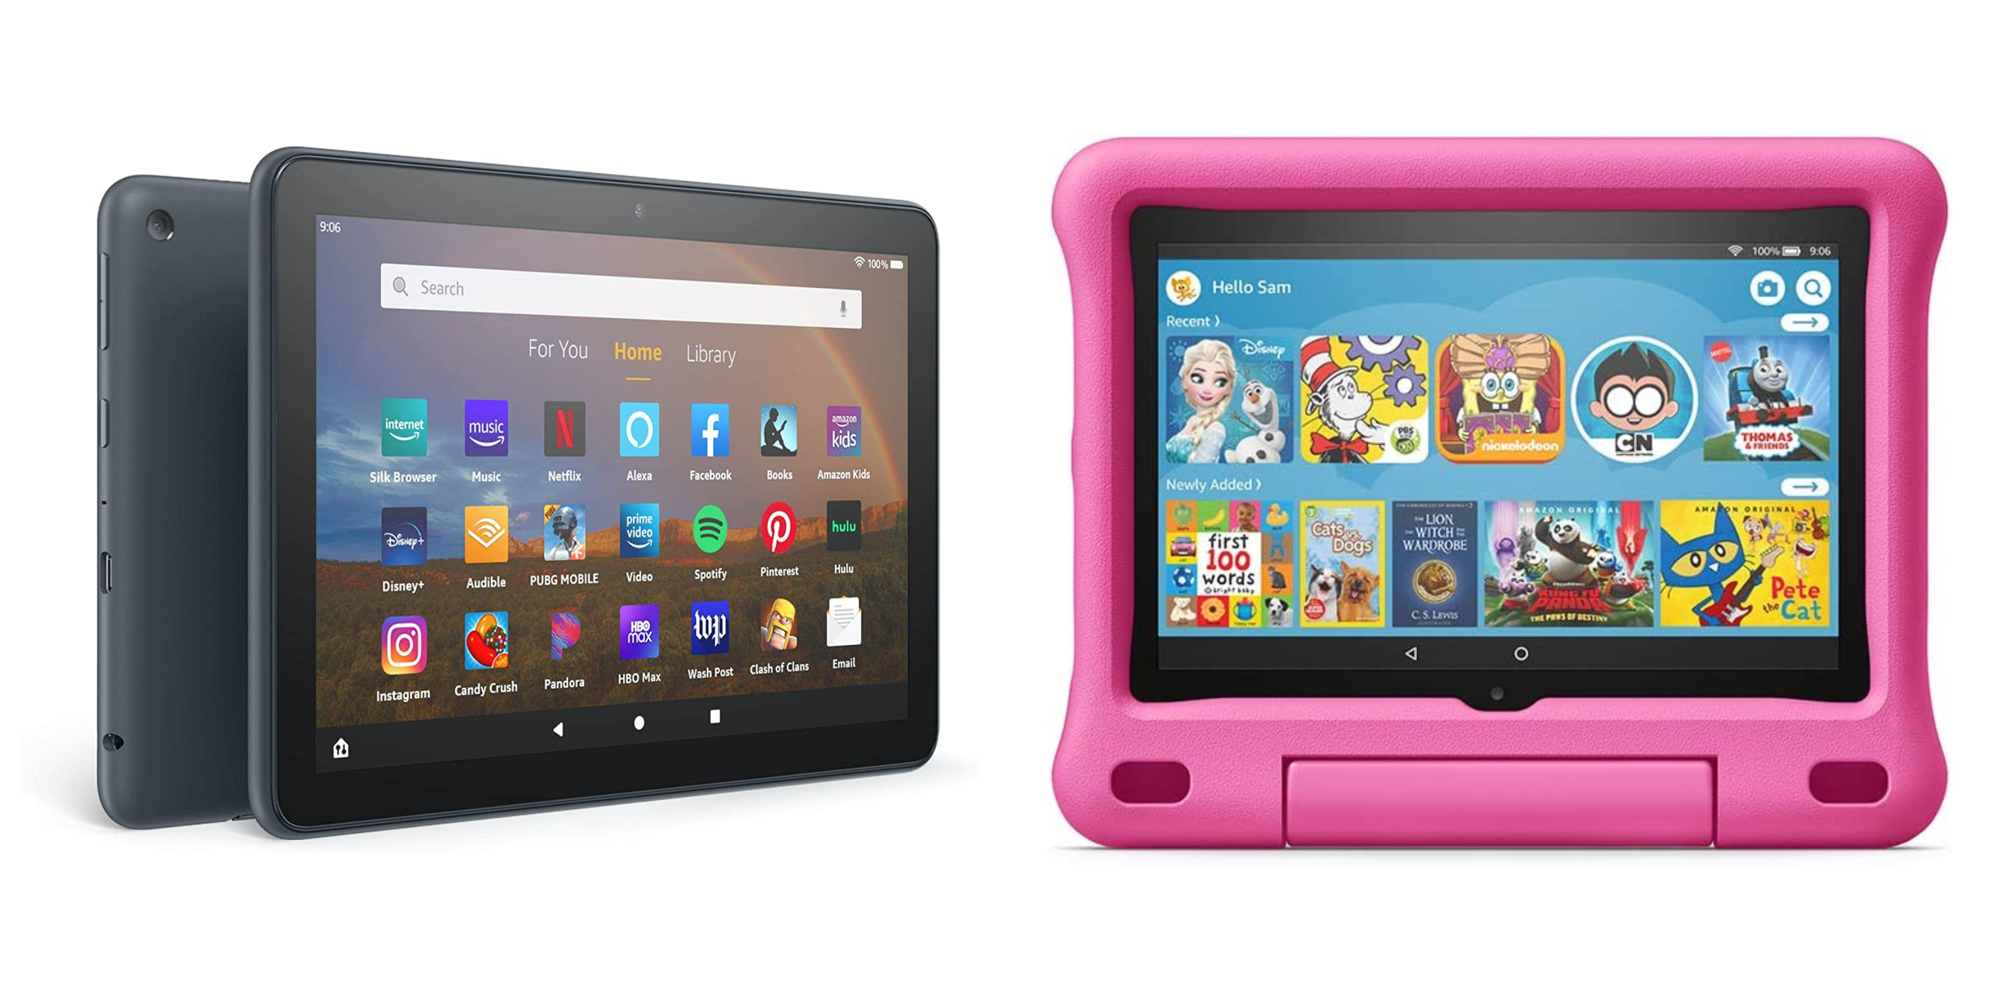 Fire 7 Kids tablet, ages 3-7. Top-selling 7 kids tablet on  -  2022 | ad-free content with parental controls included, 10-hr battery, 16